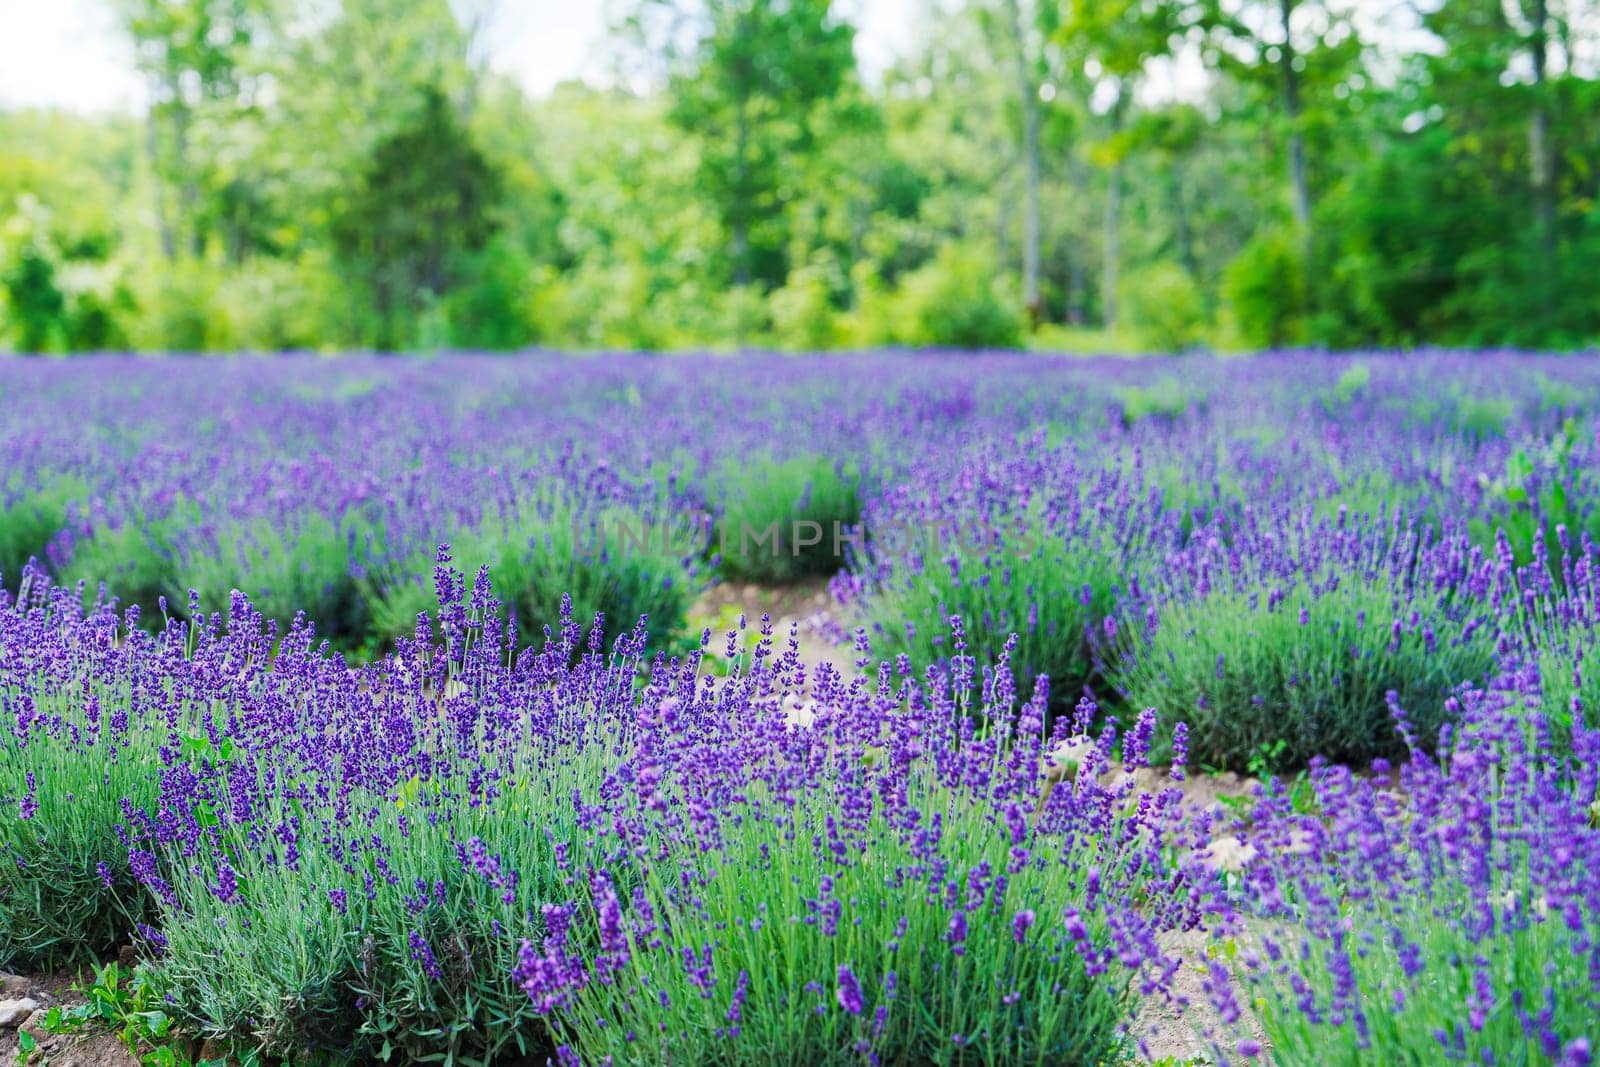 A breathtaking panoramic view of a picturesque and vibrant lavender field in full bloom, set against a clear blue sky on a sunny day, creating a perfect scenic landscape